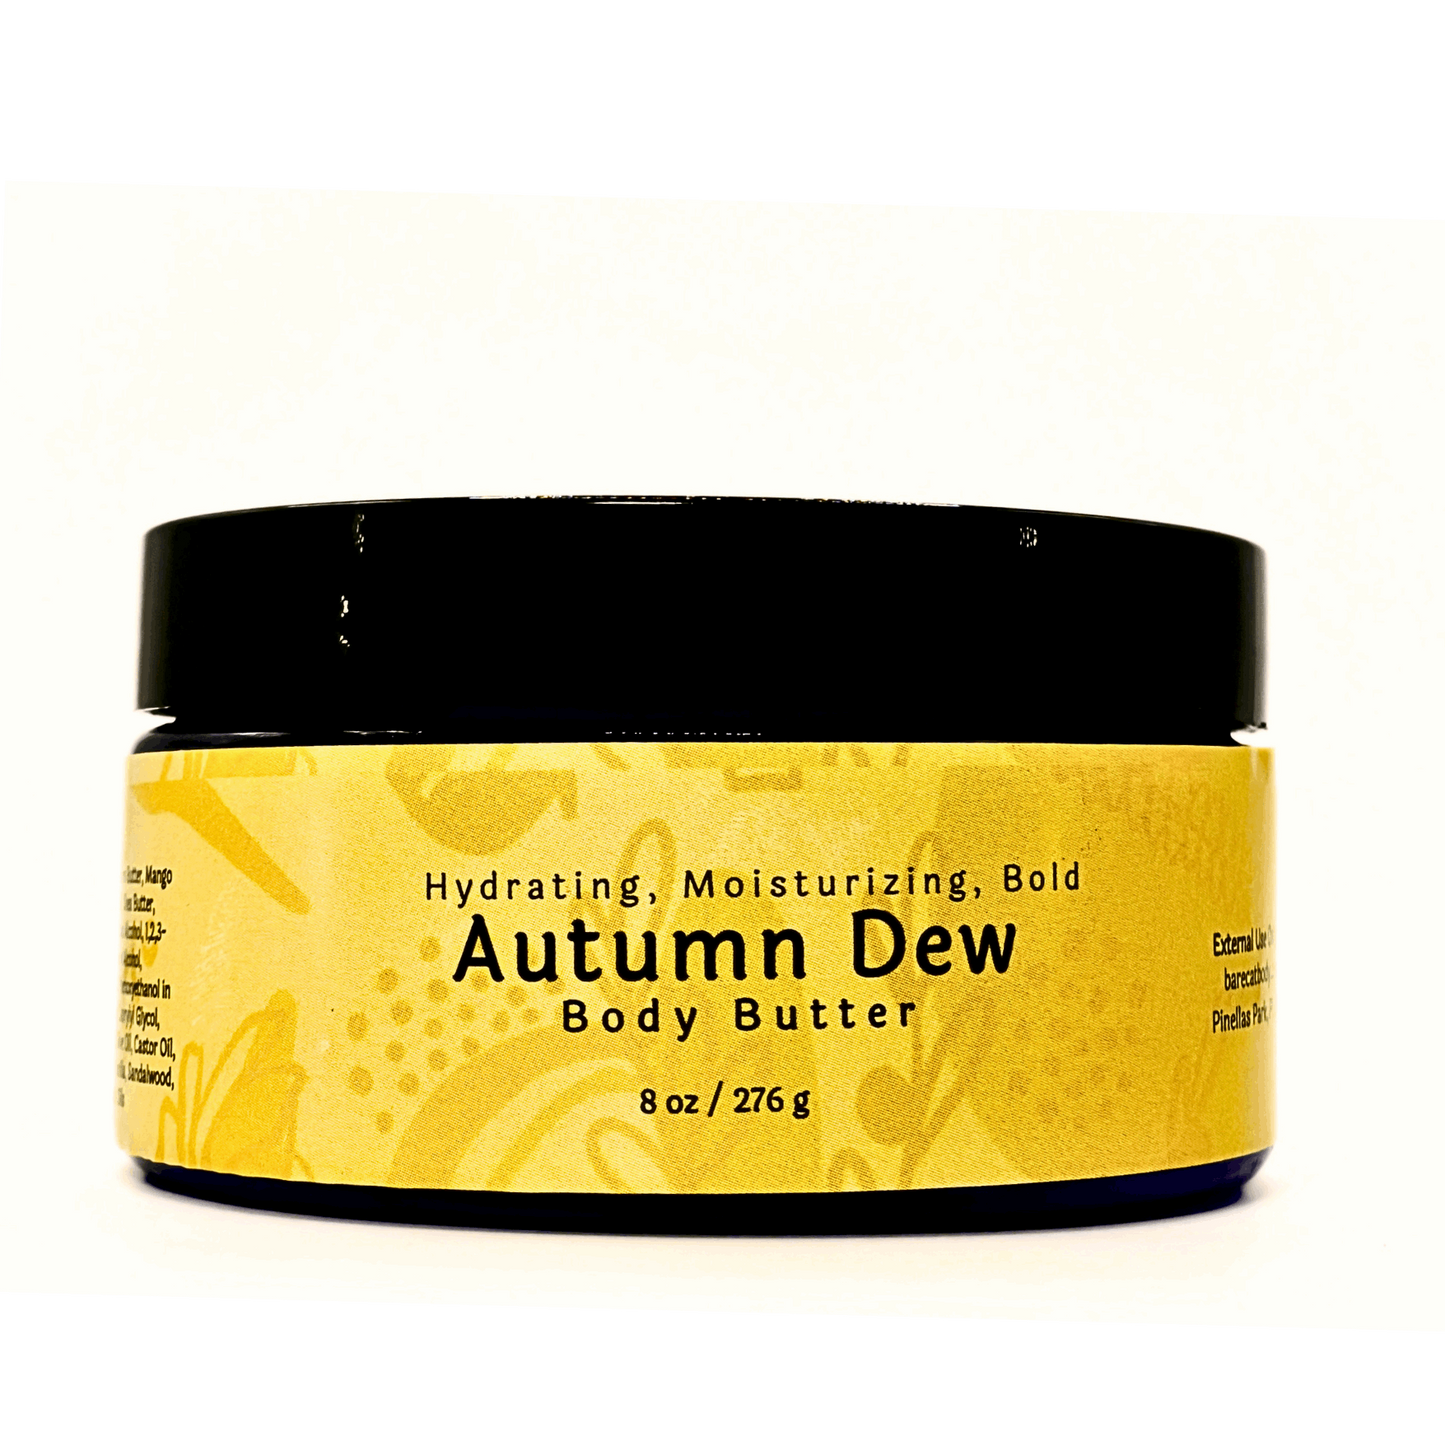 Autumn Dew Bold Scented Body Butter container showcasing its rich and creamy texture.